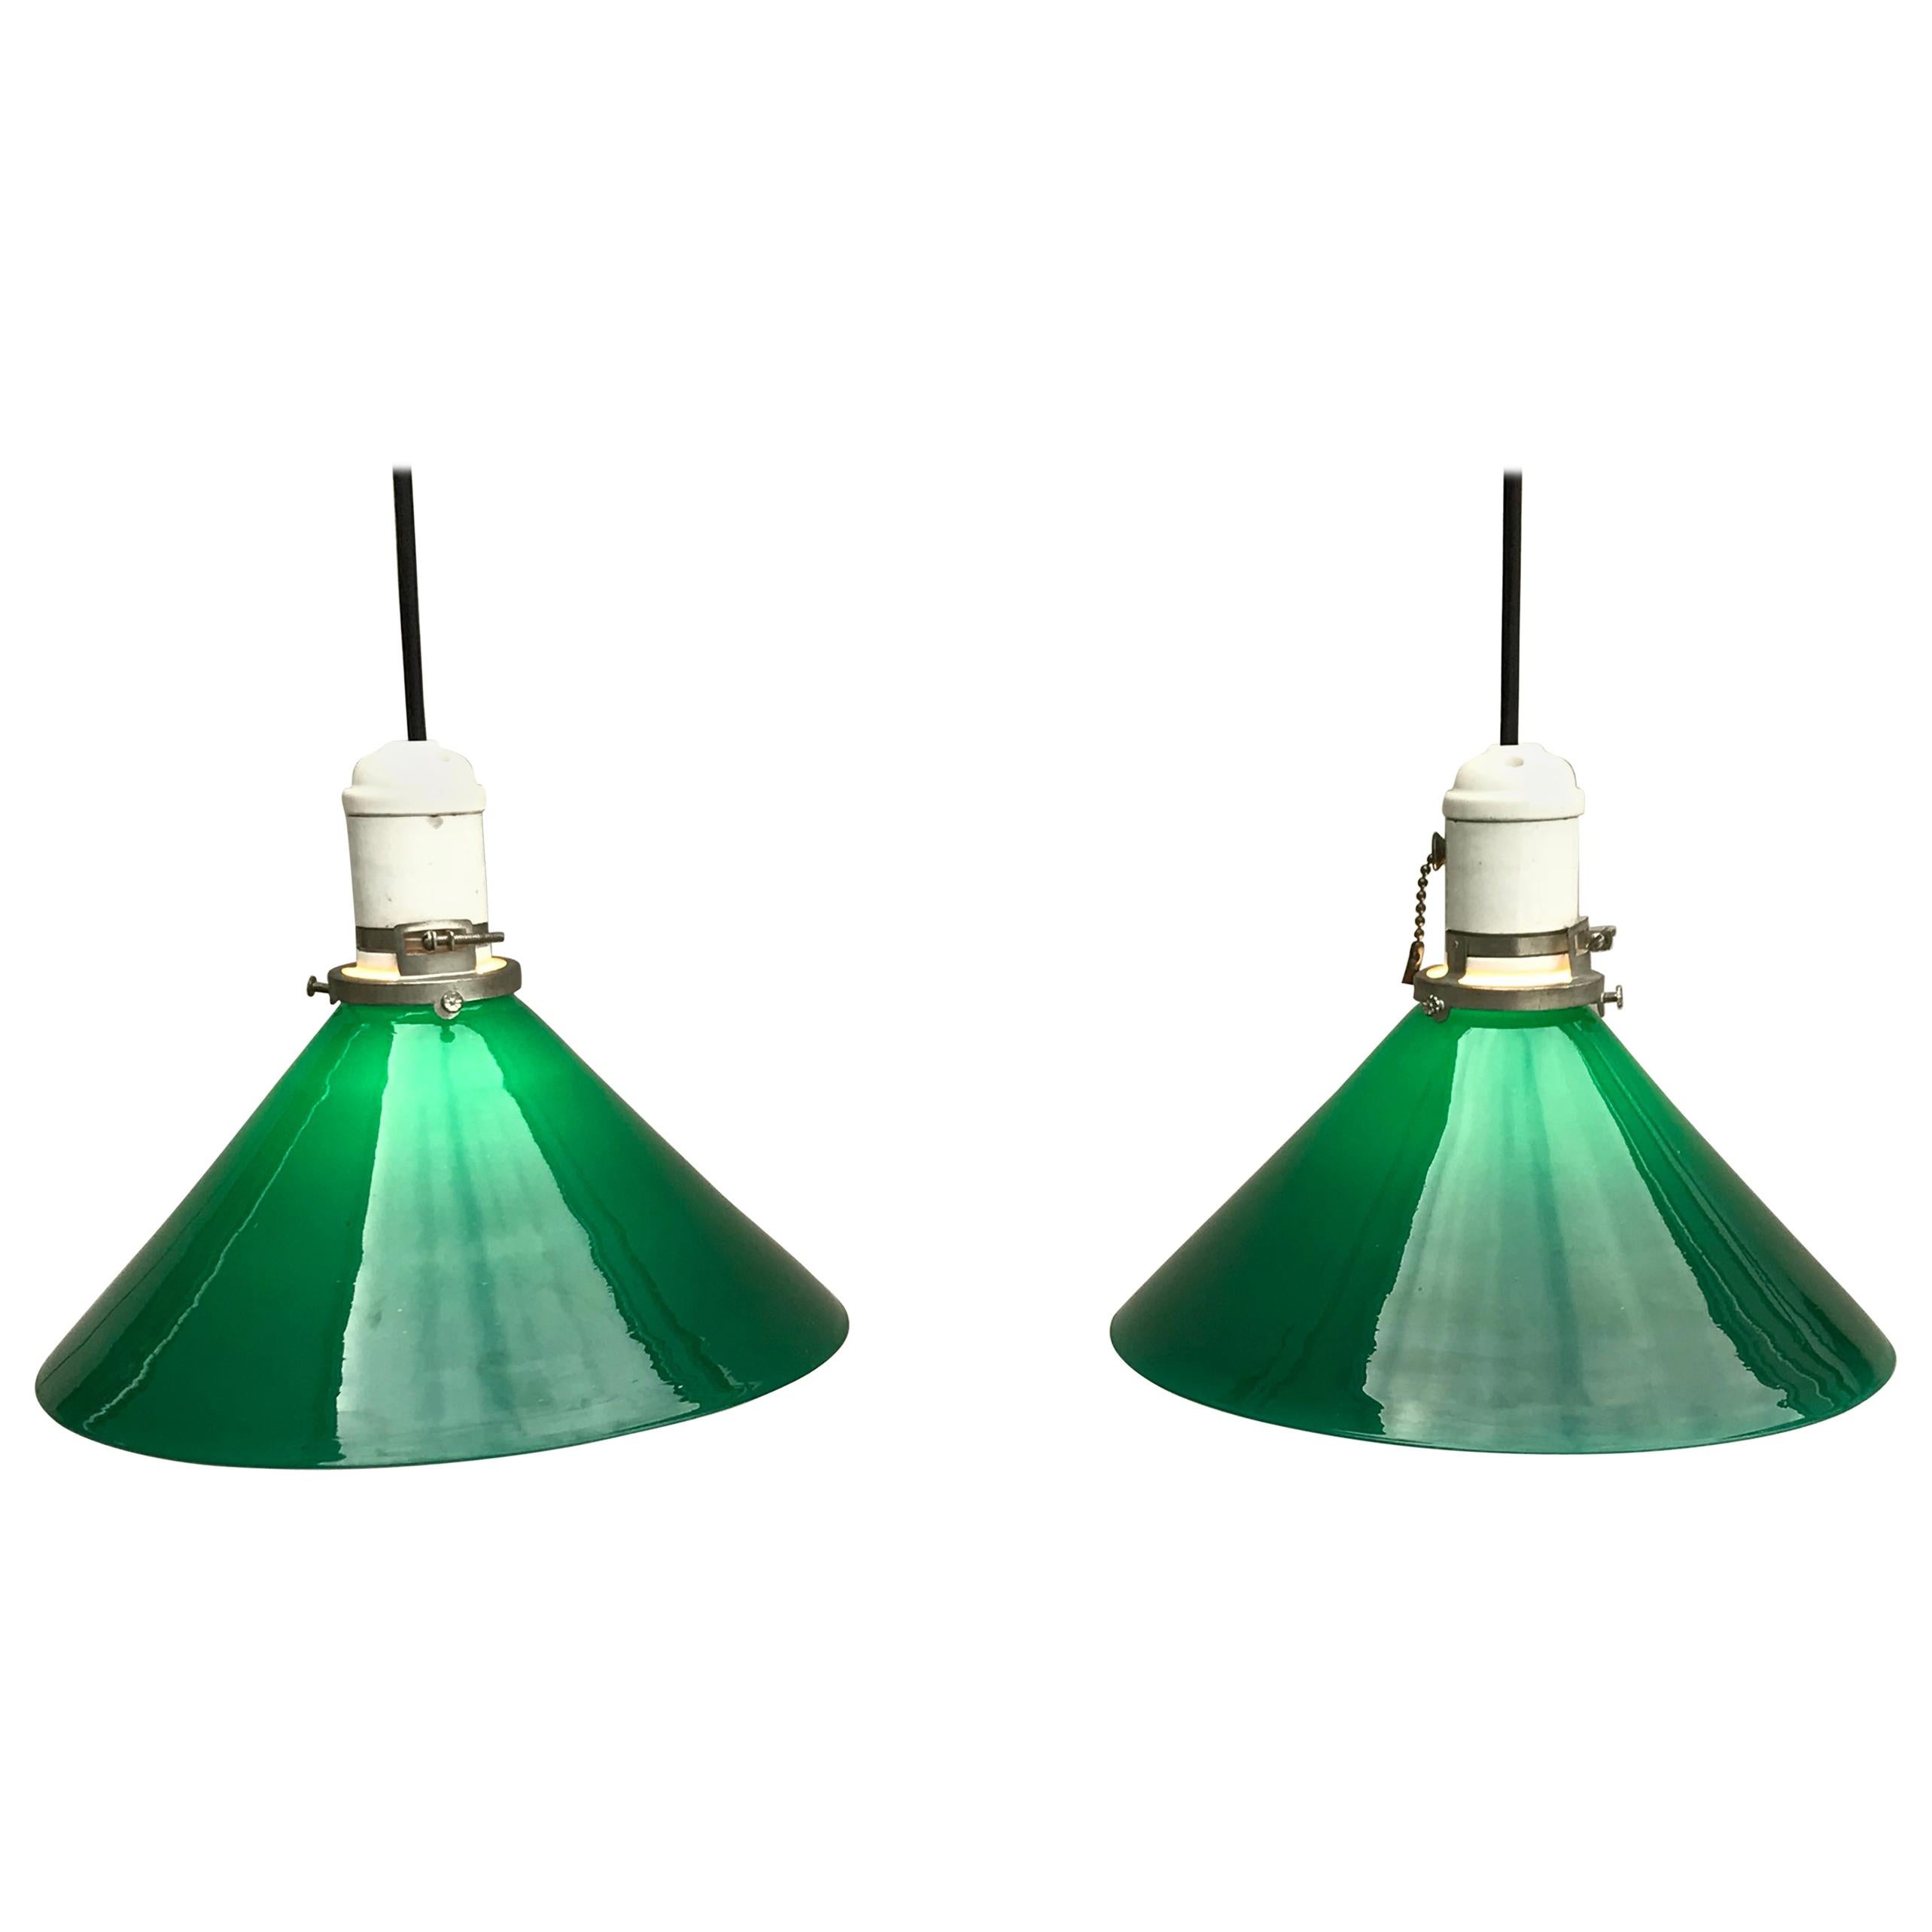 Pair of Mid Century Industrial Green Glass Pendant Lights, Germany